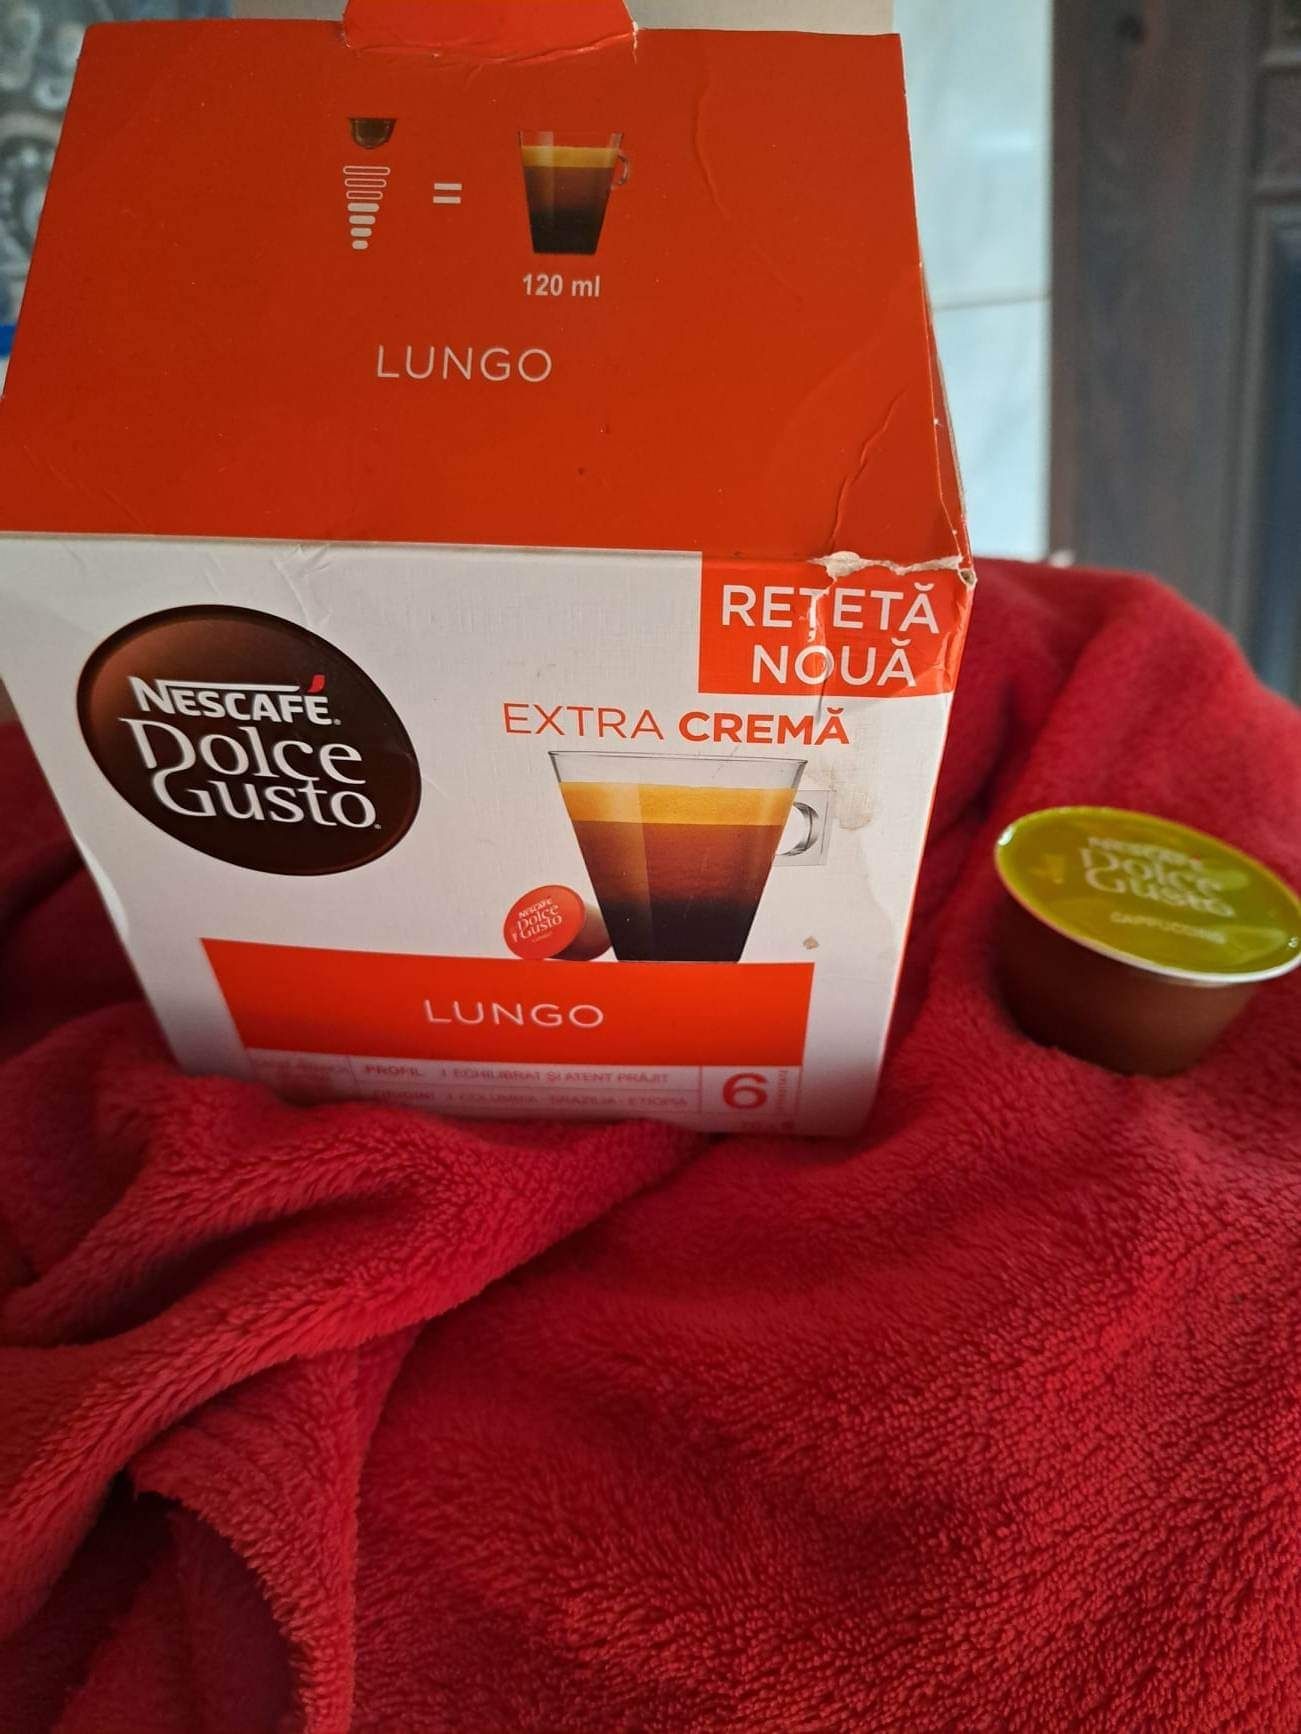 Cafetiera dolce gusto